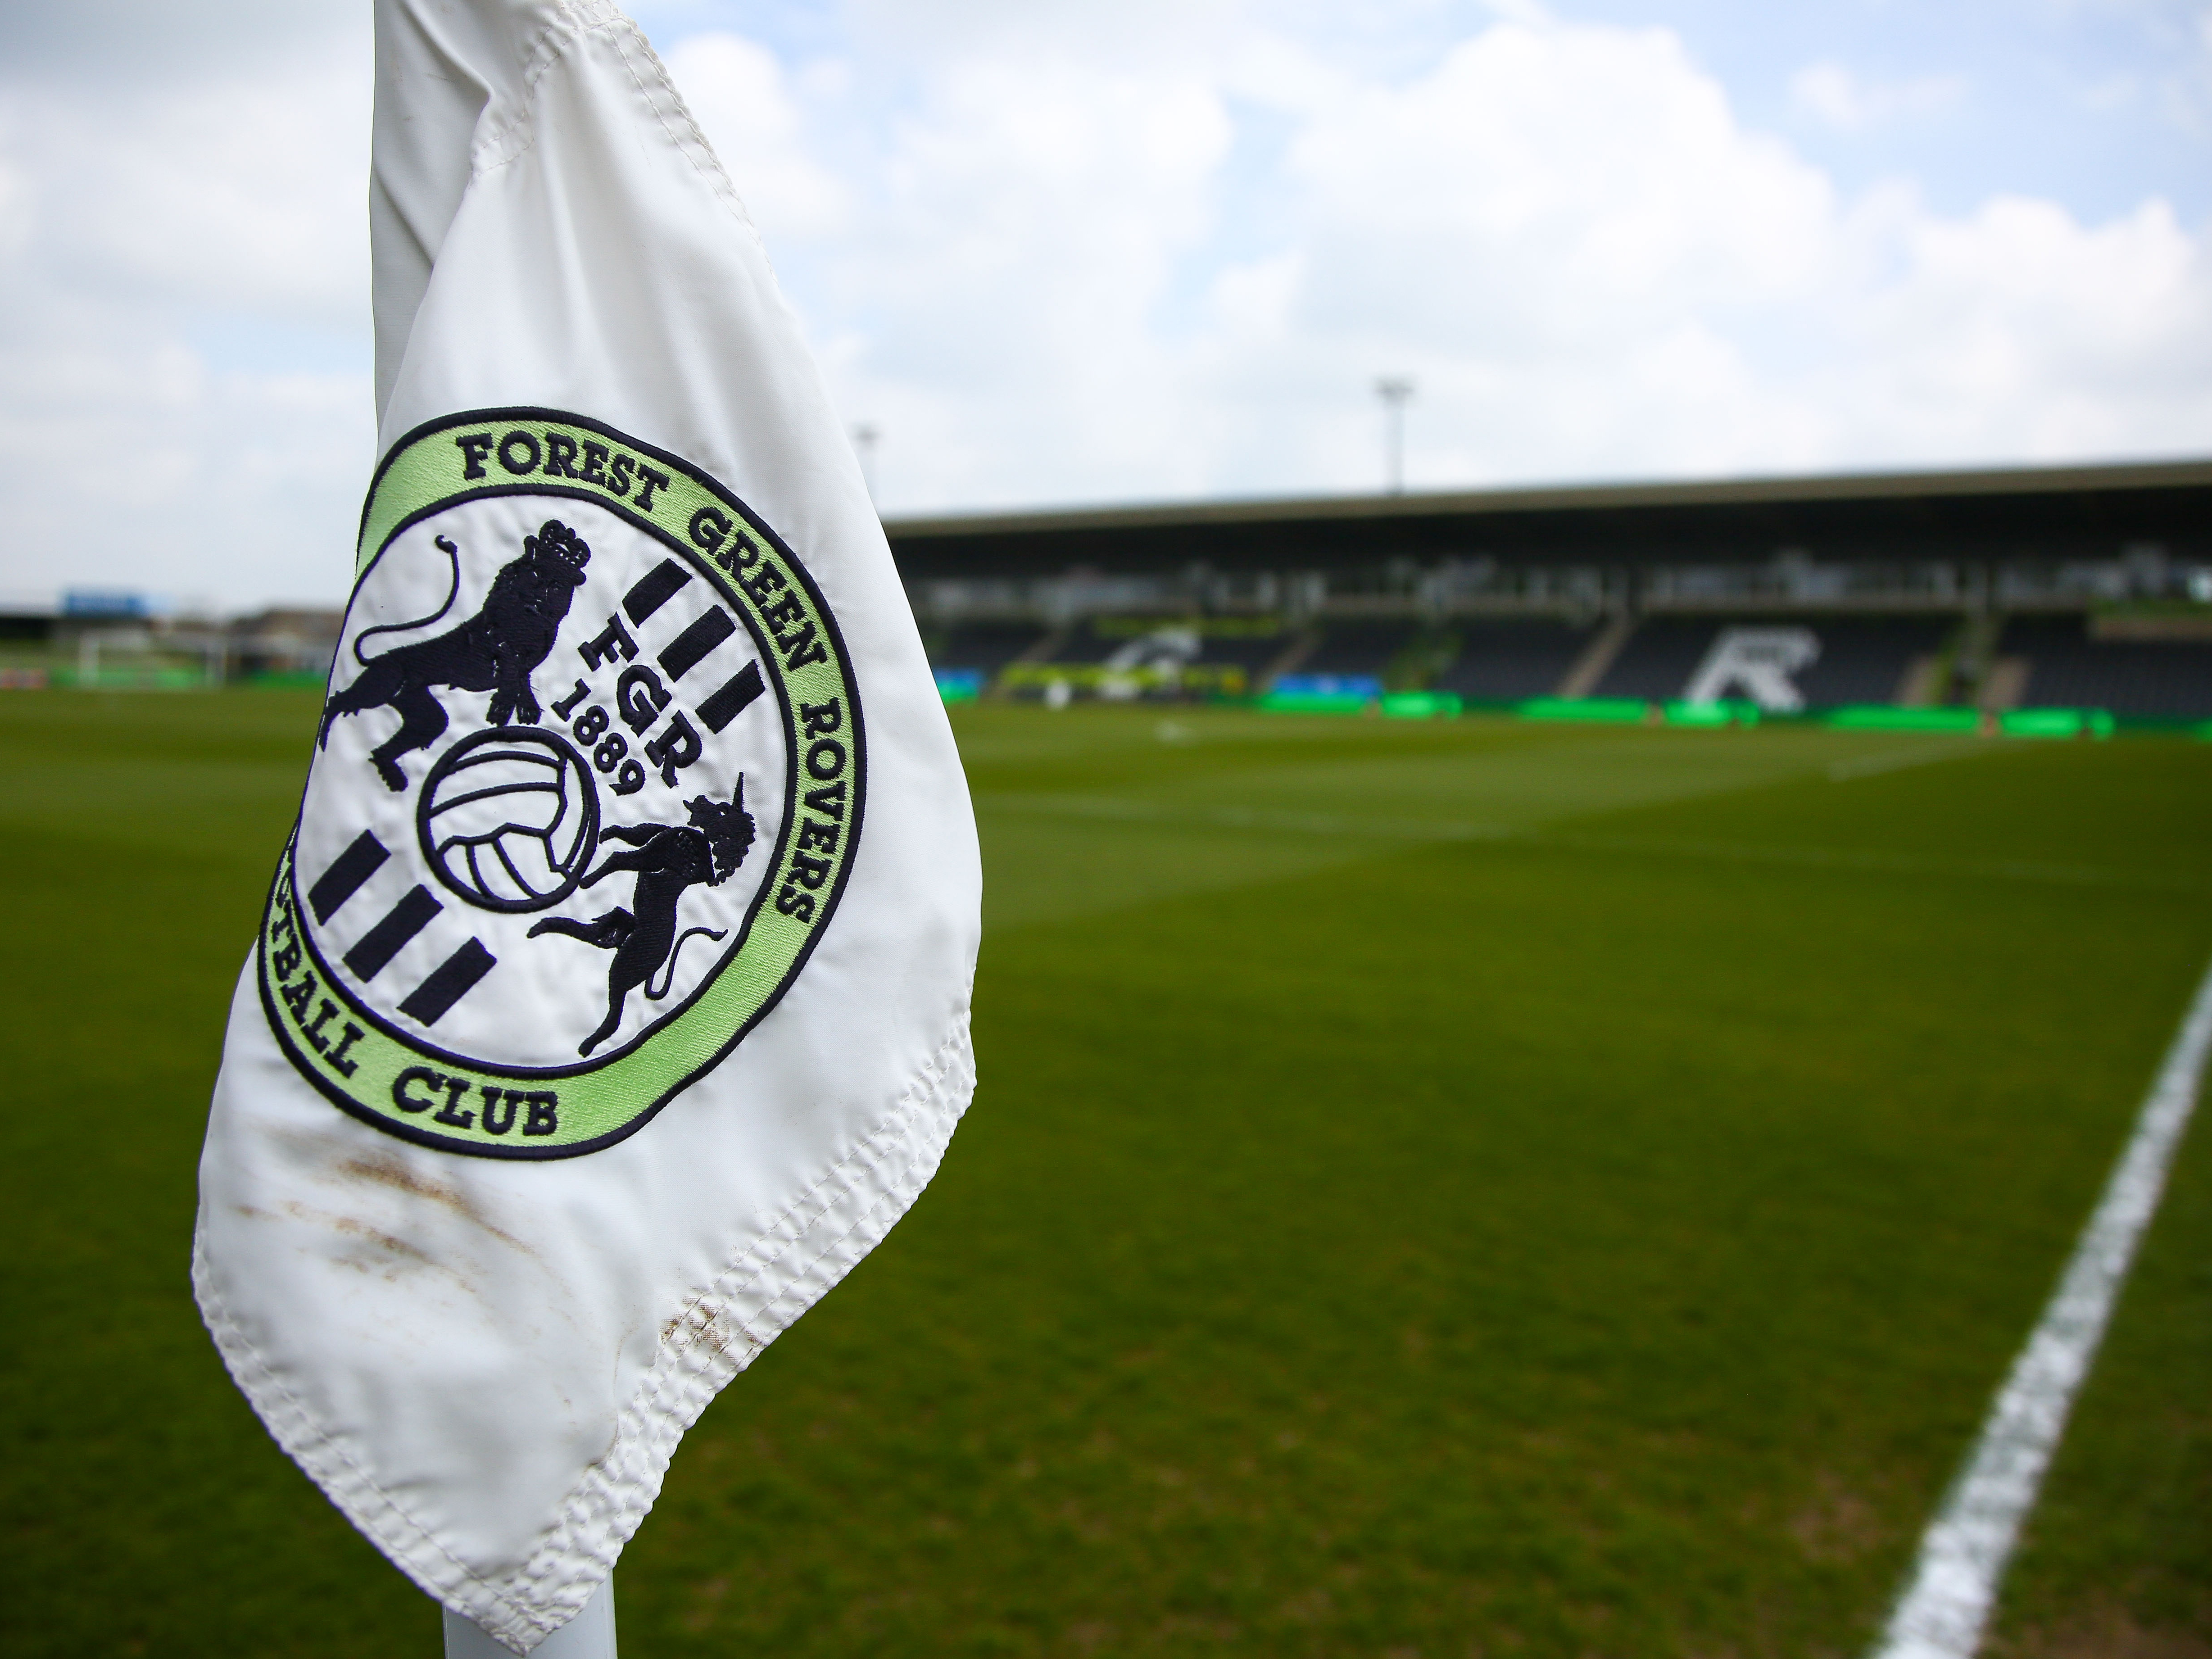 An image of Forest Green Rovers's stadium